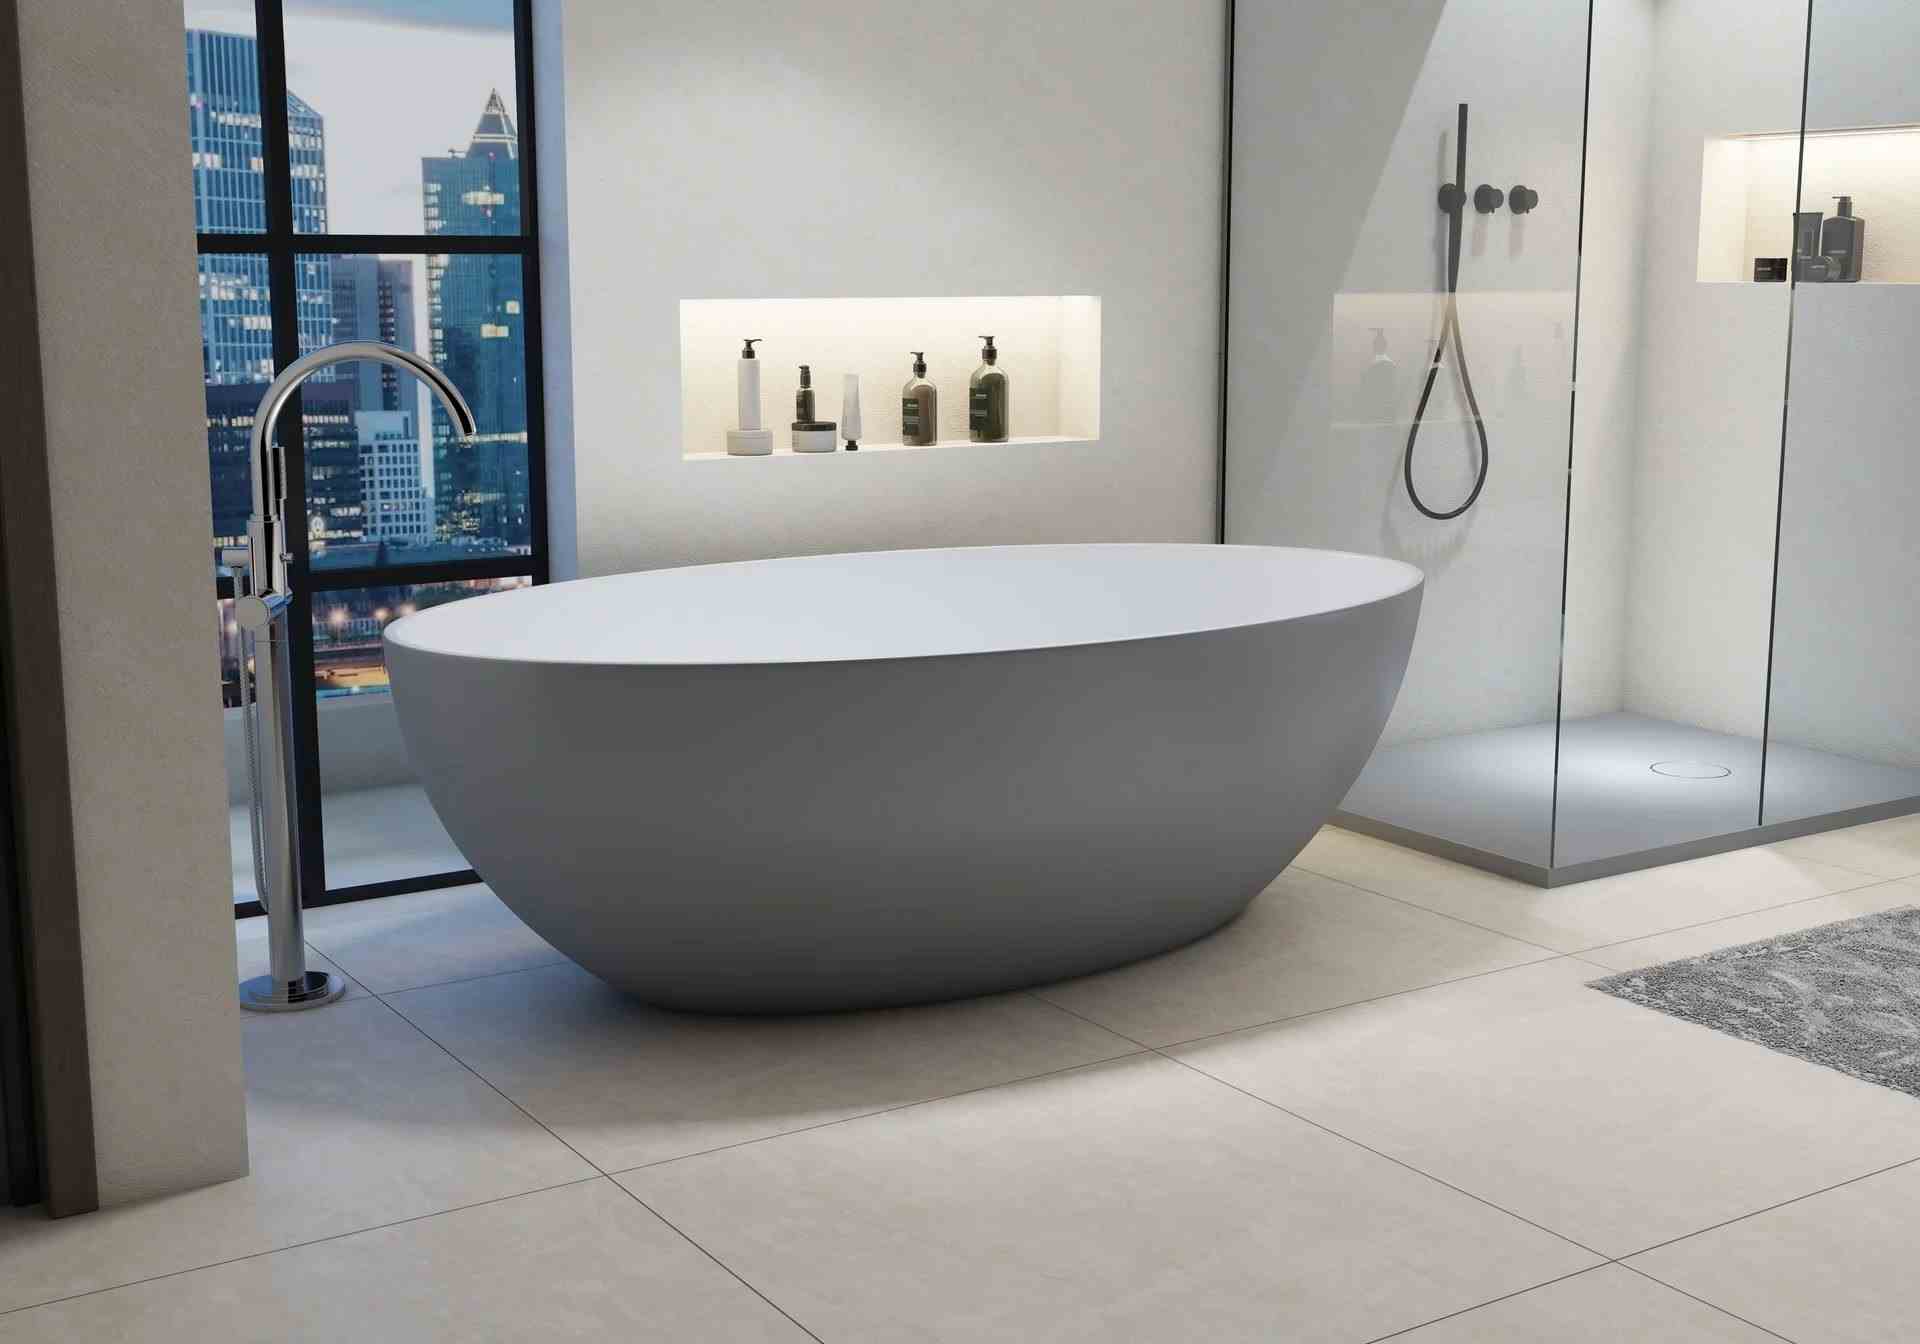 The Freestanding Bath To Play On The Offset 